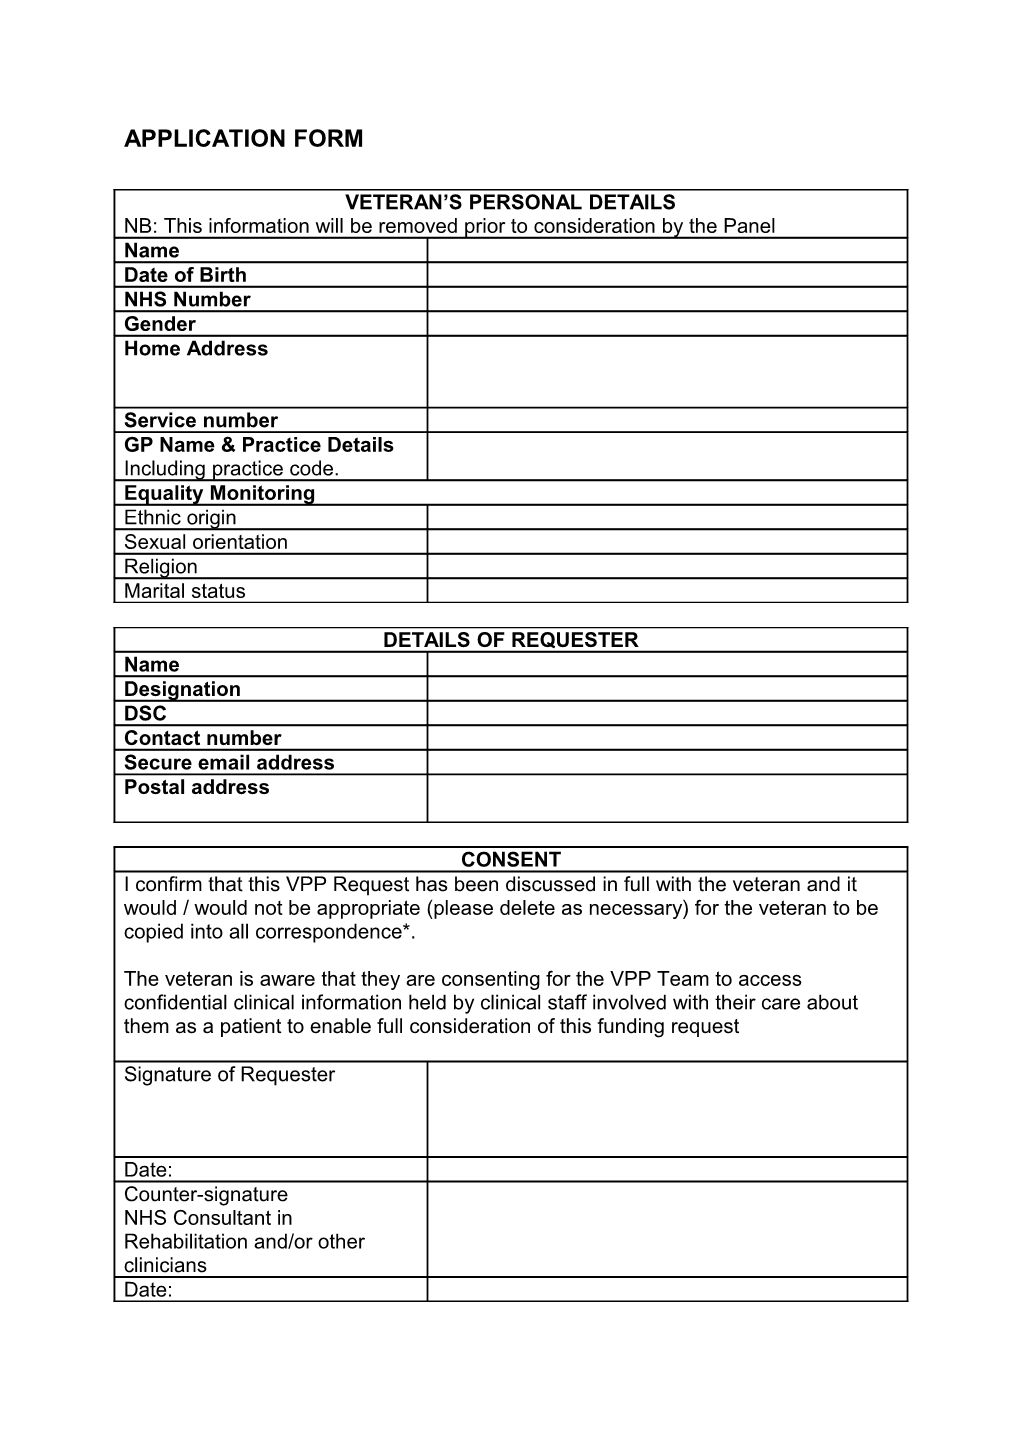 Application Form s42